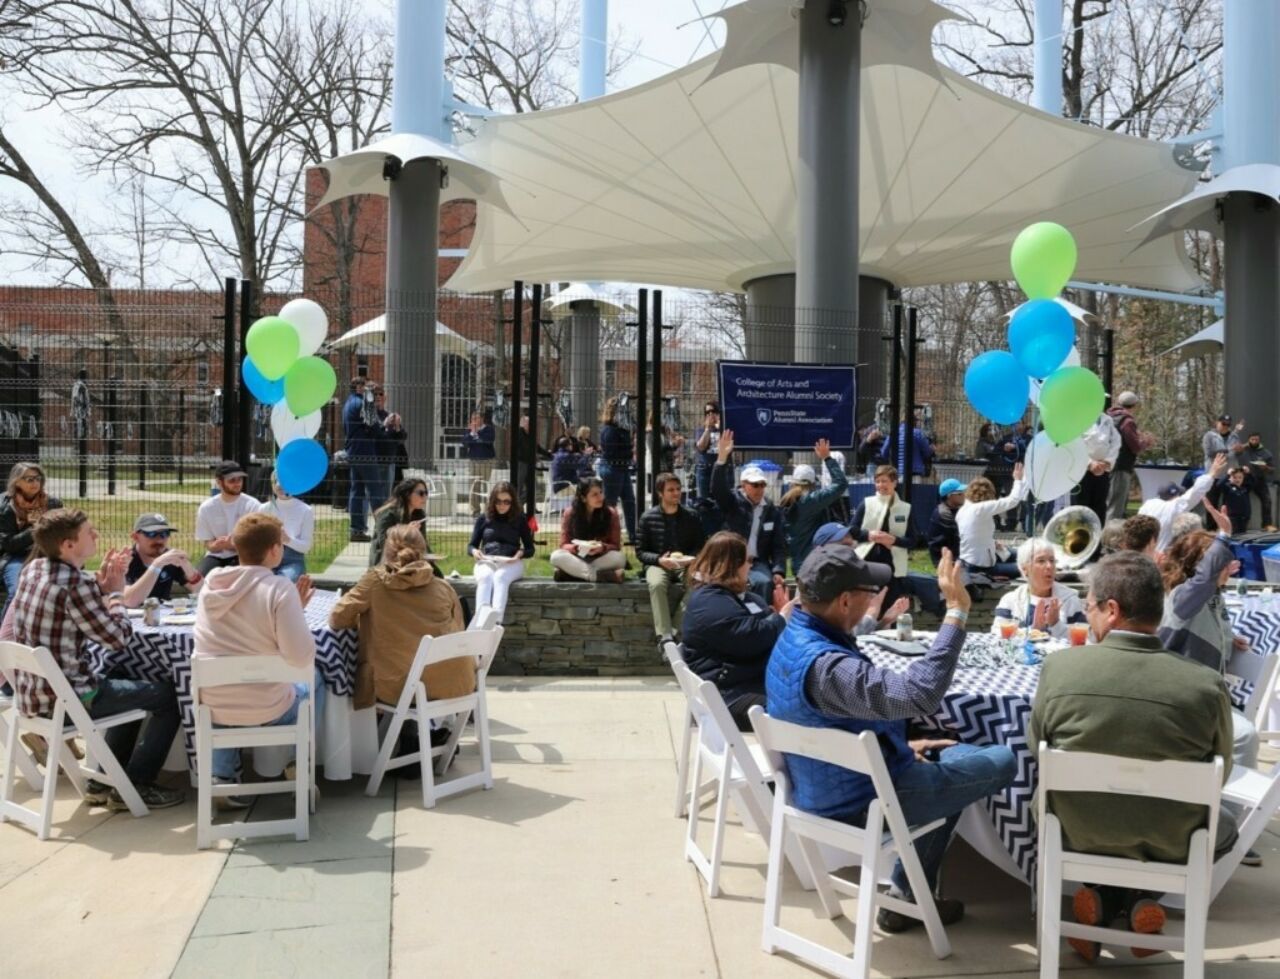 People seated at round tables outdoors with balloon centerpieces.